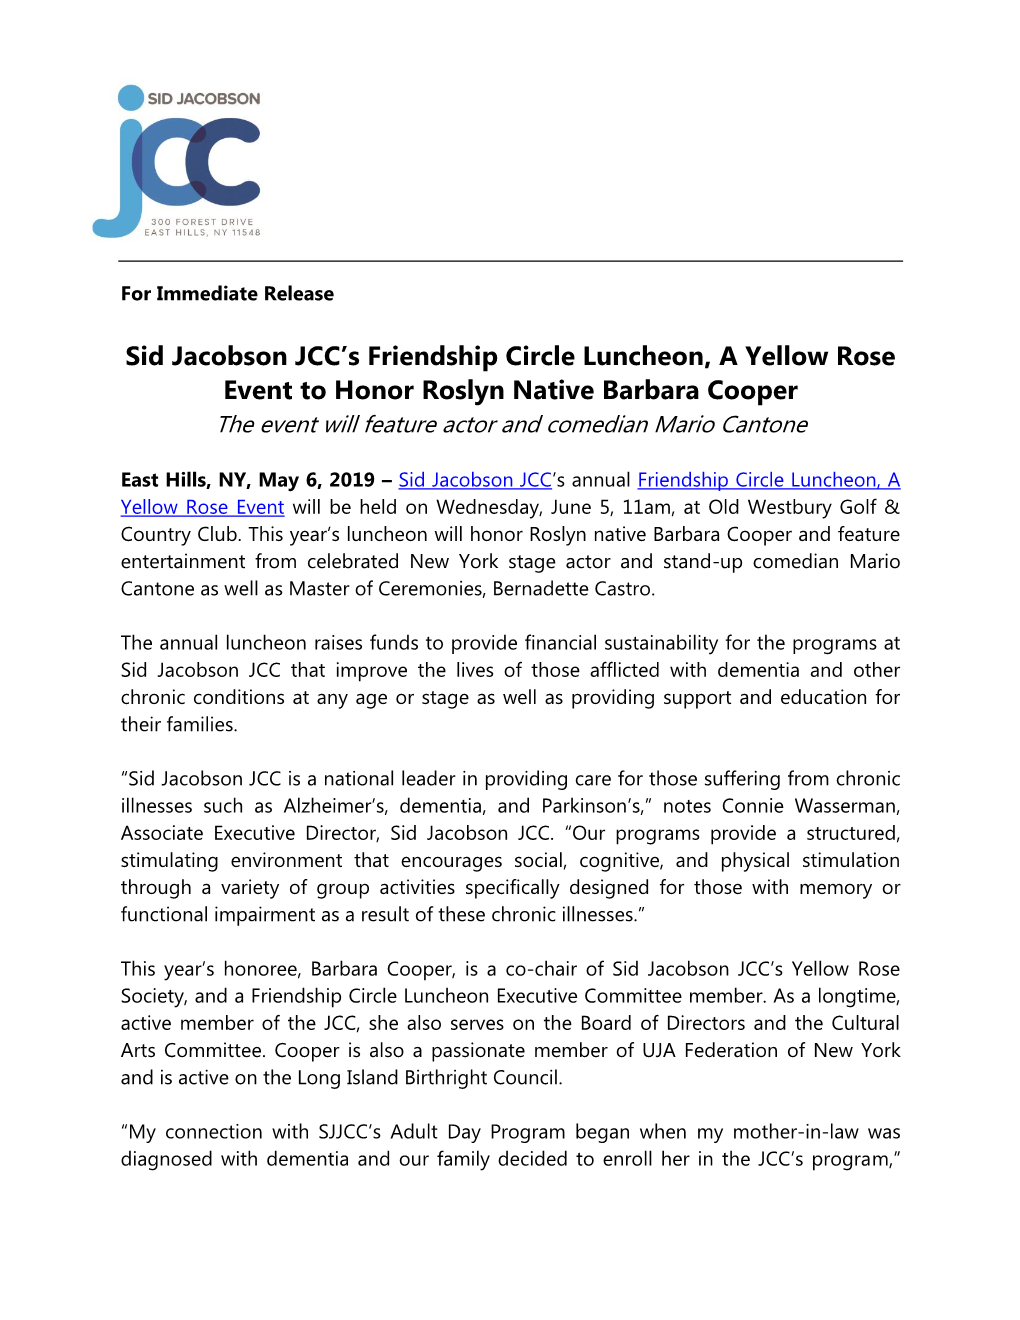 Sid Jacobson JCC's Friendship Circle Luncheon, a Yellow Rose Event To